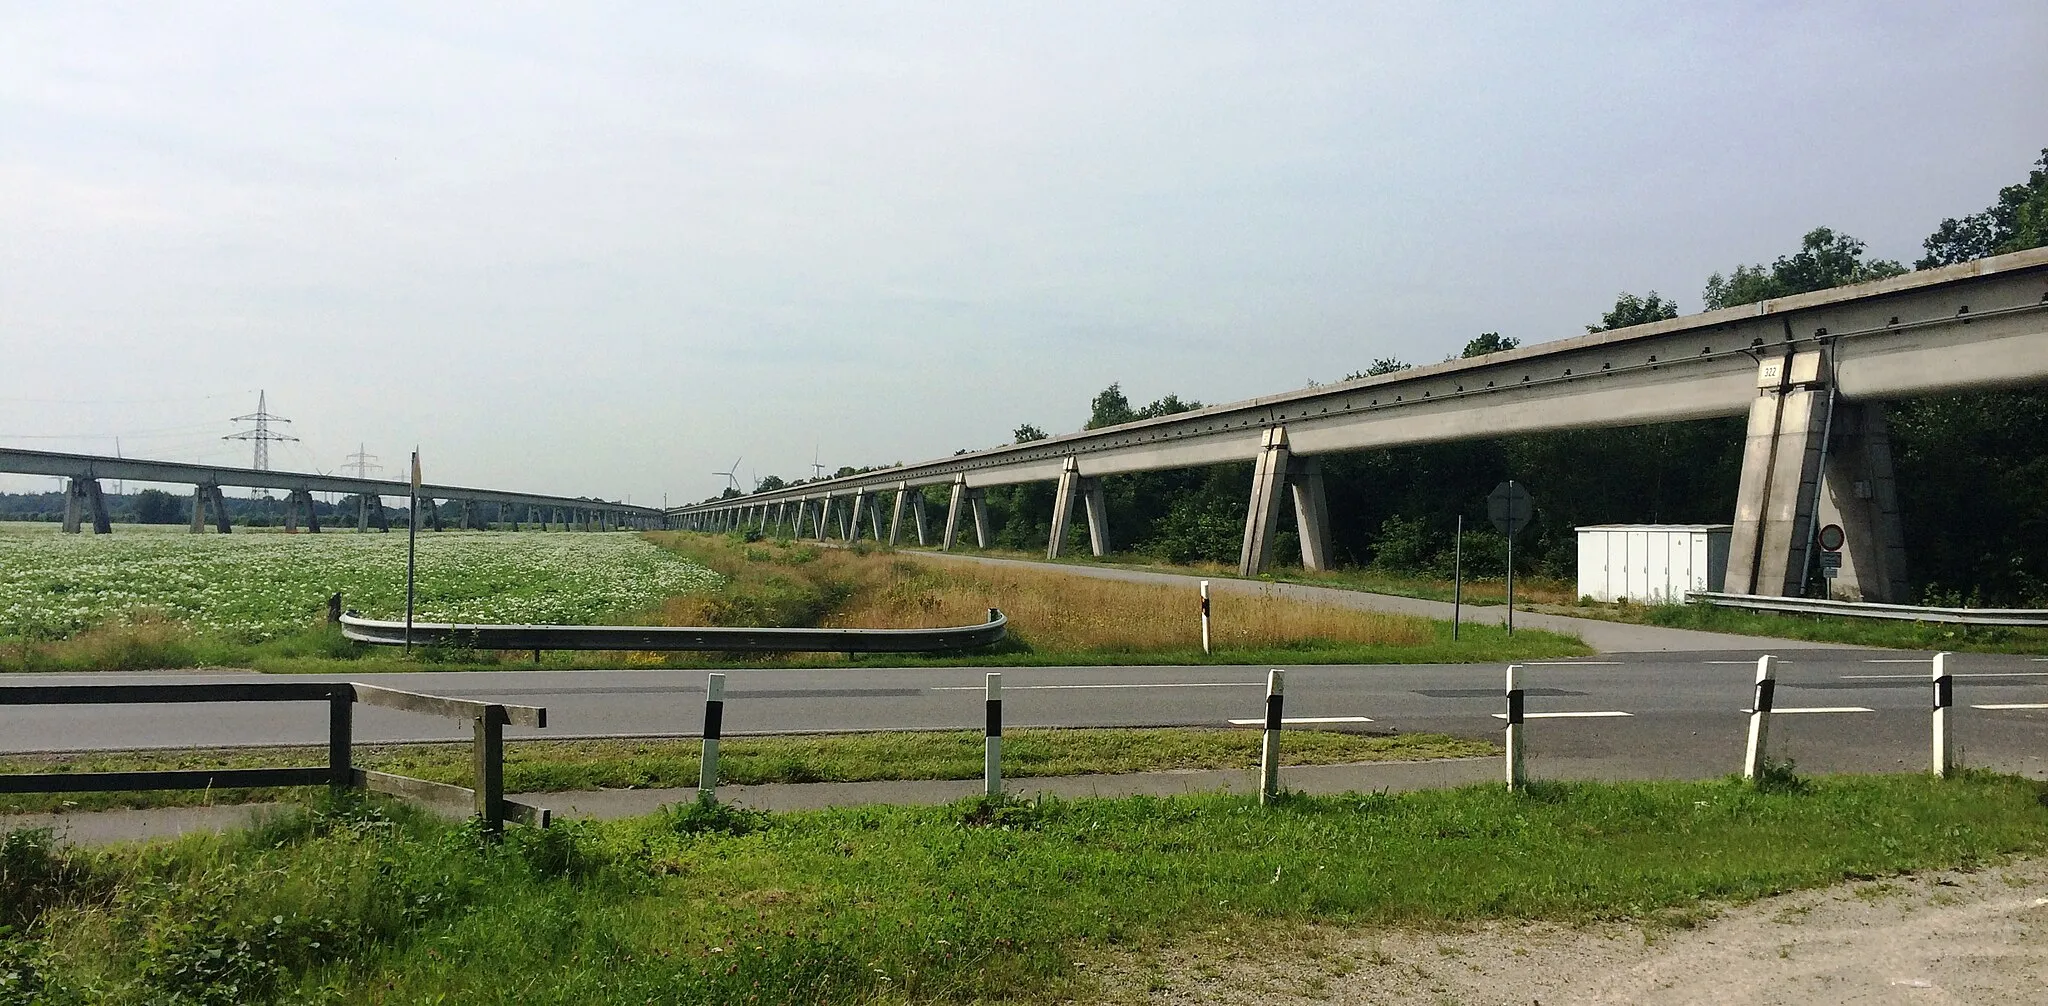 Photo showing: Transrapid monorail in Emsland, northwest Germany. Photo from summer of 2015, after its operation was abandoned.